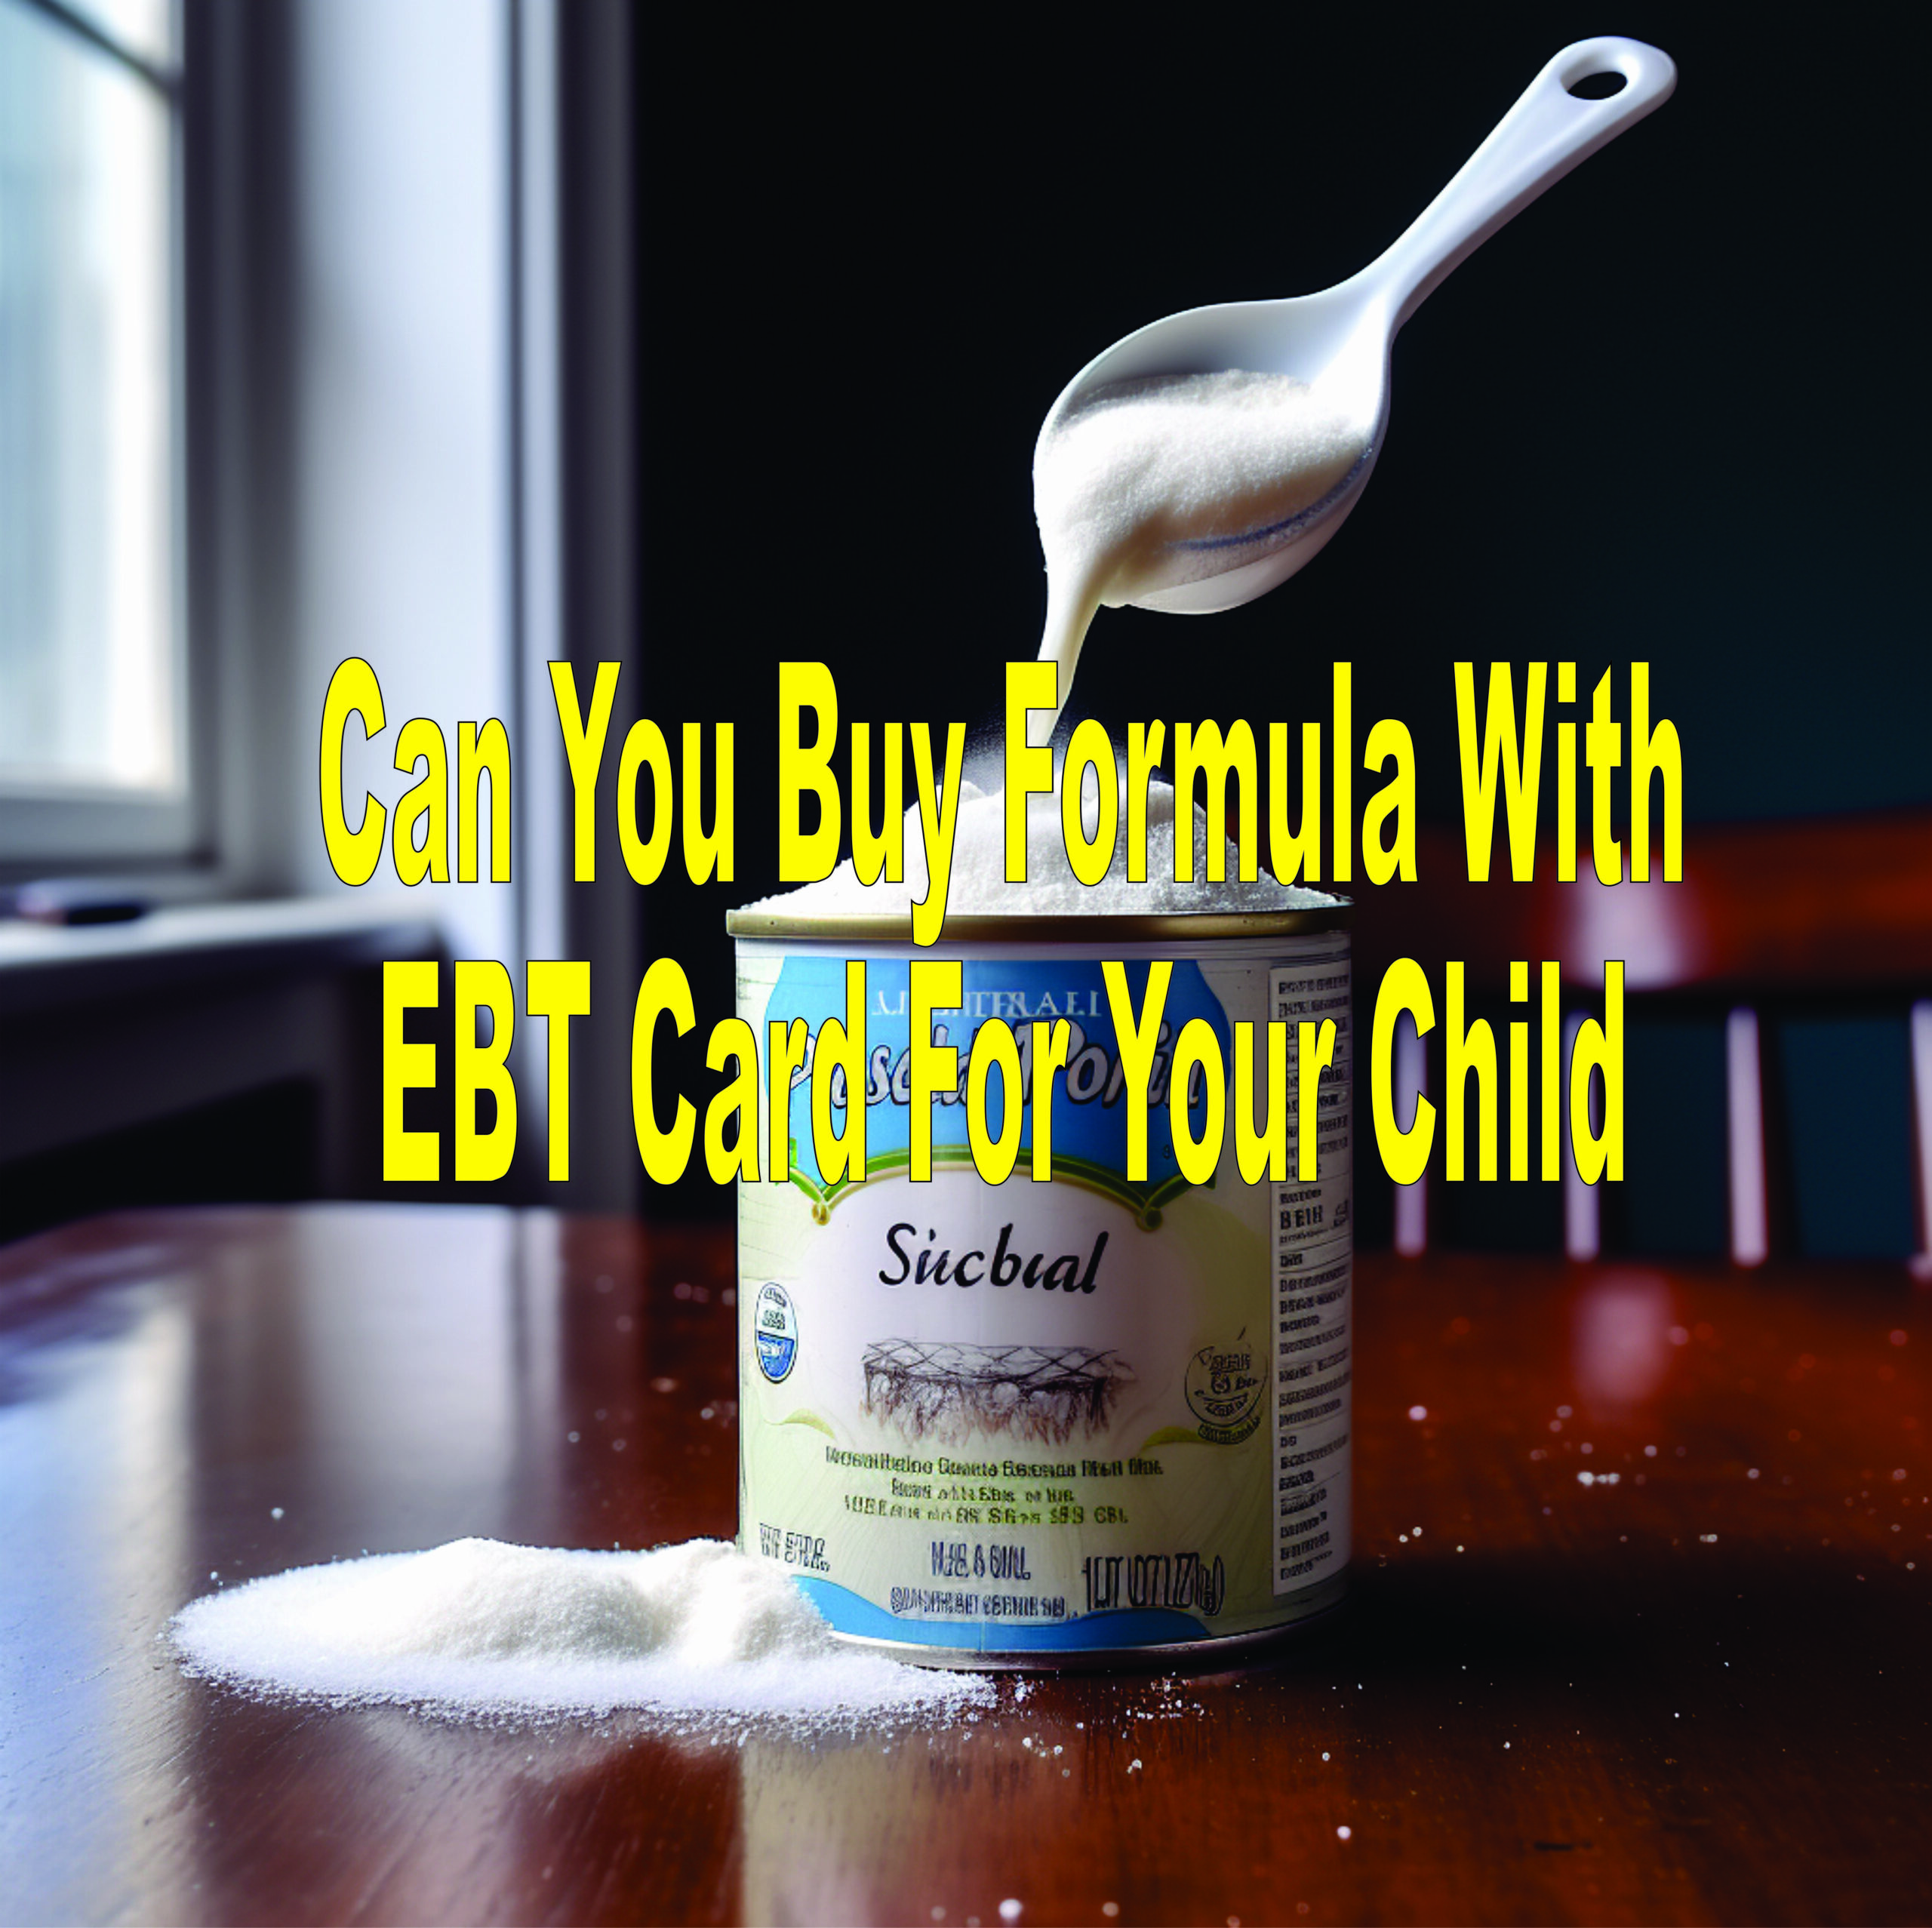 Can You Buy Formula With Ebt Card For Your Child